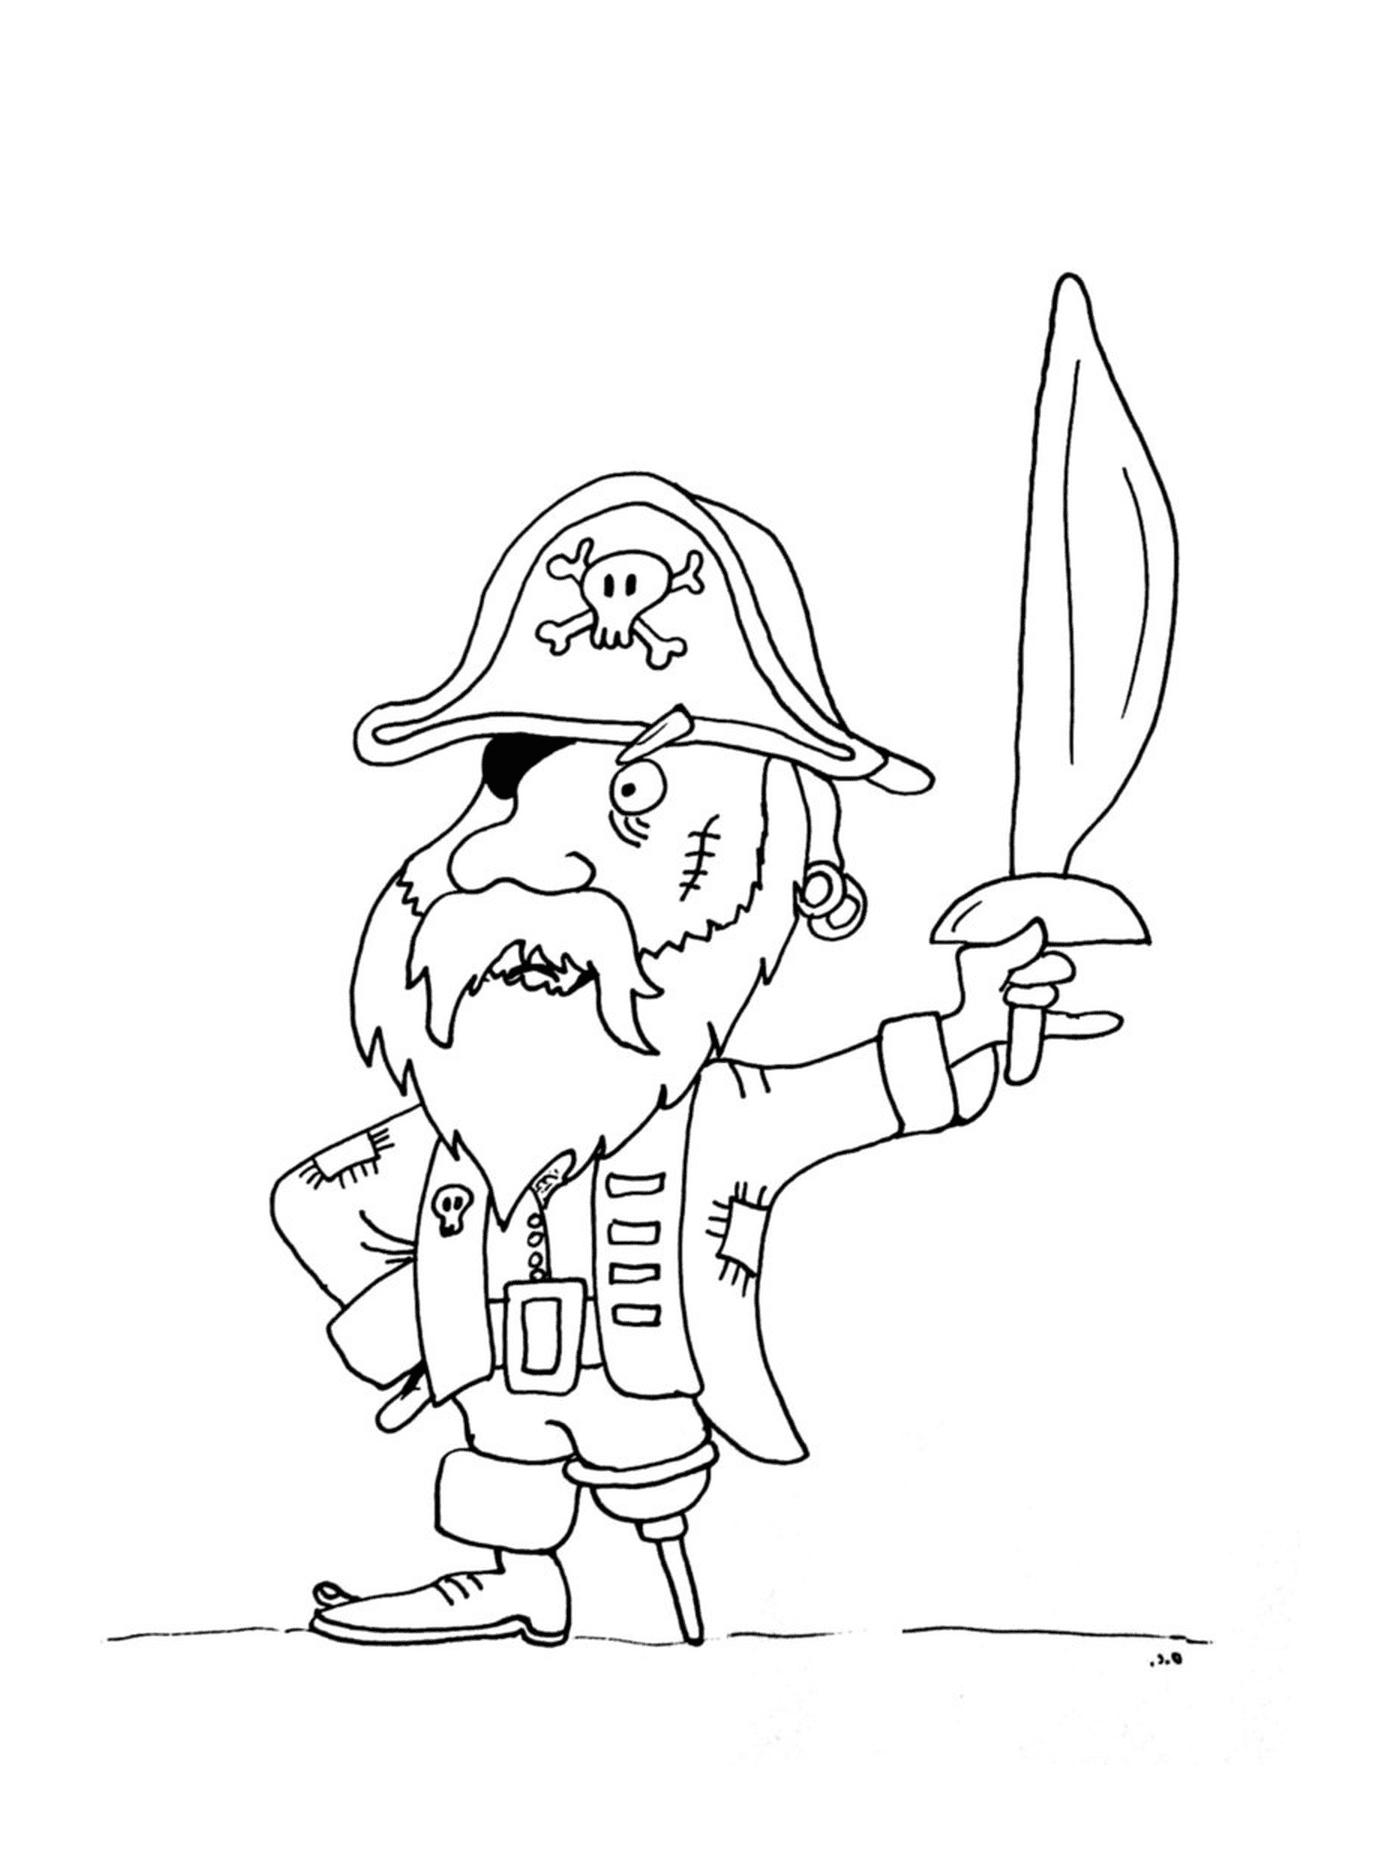  Pirate with courageous wooden leg 